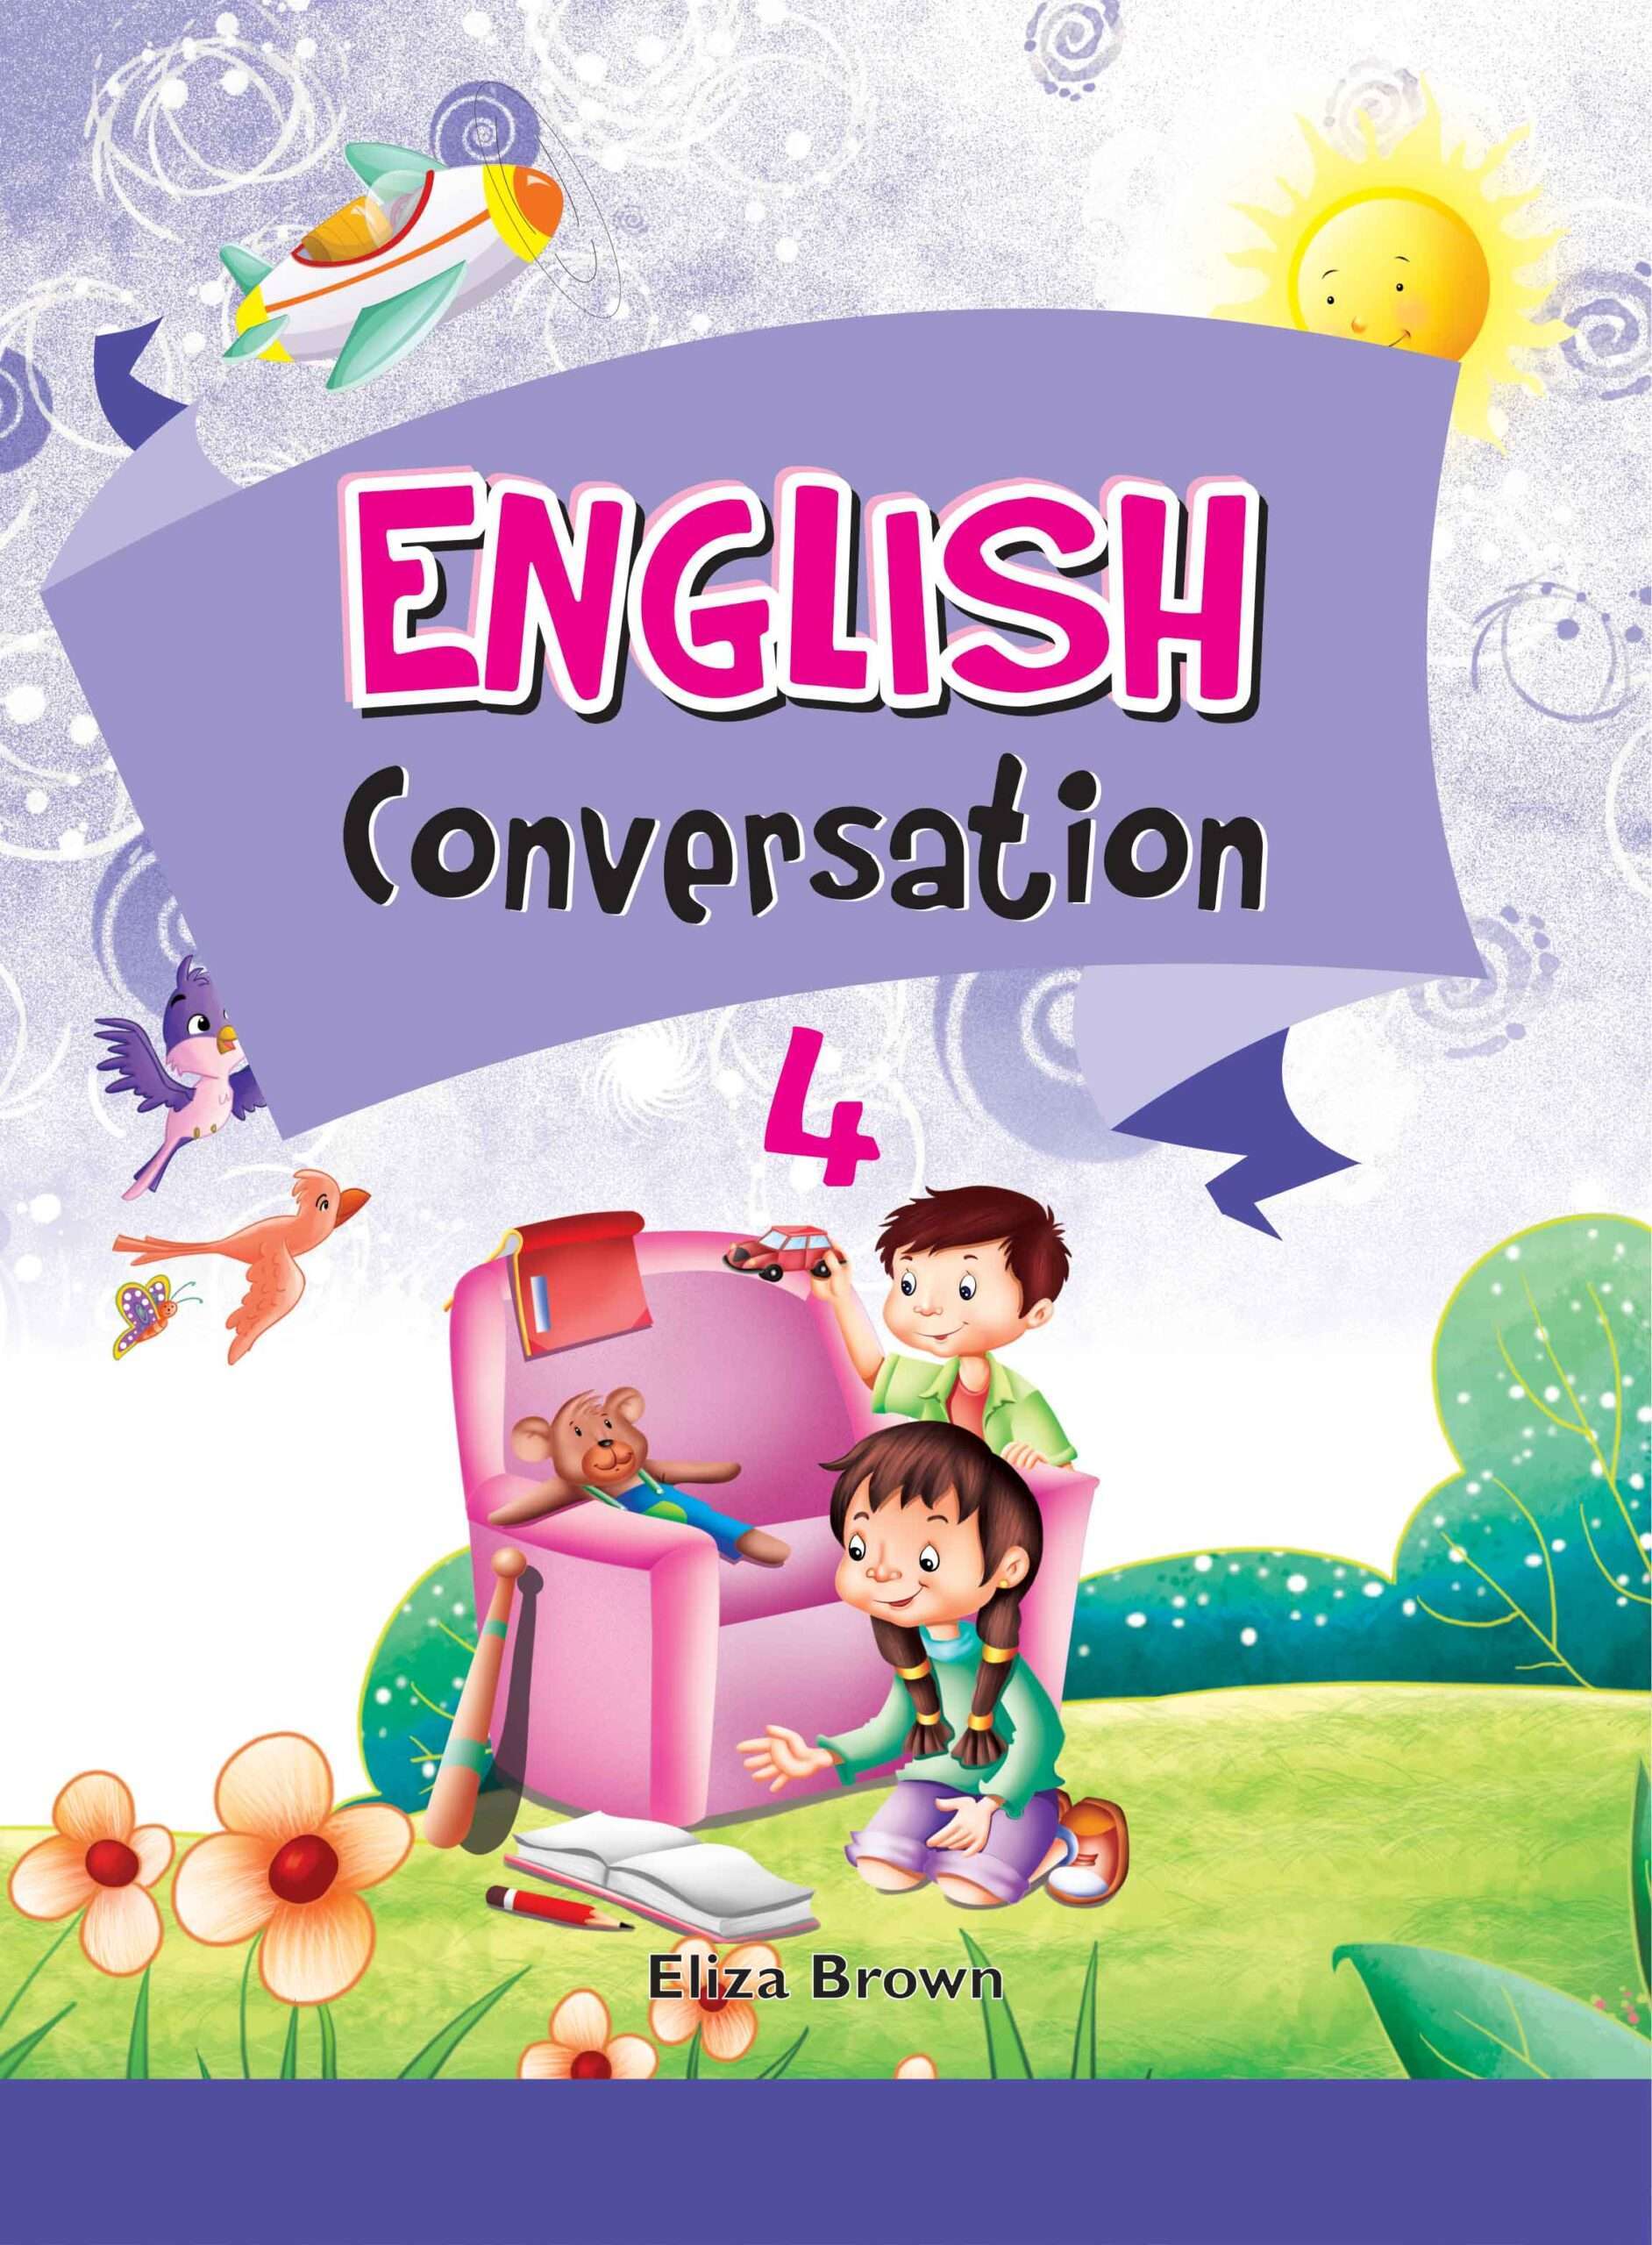 Buy English Conversation for 4